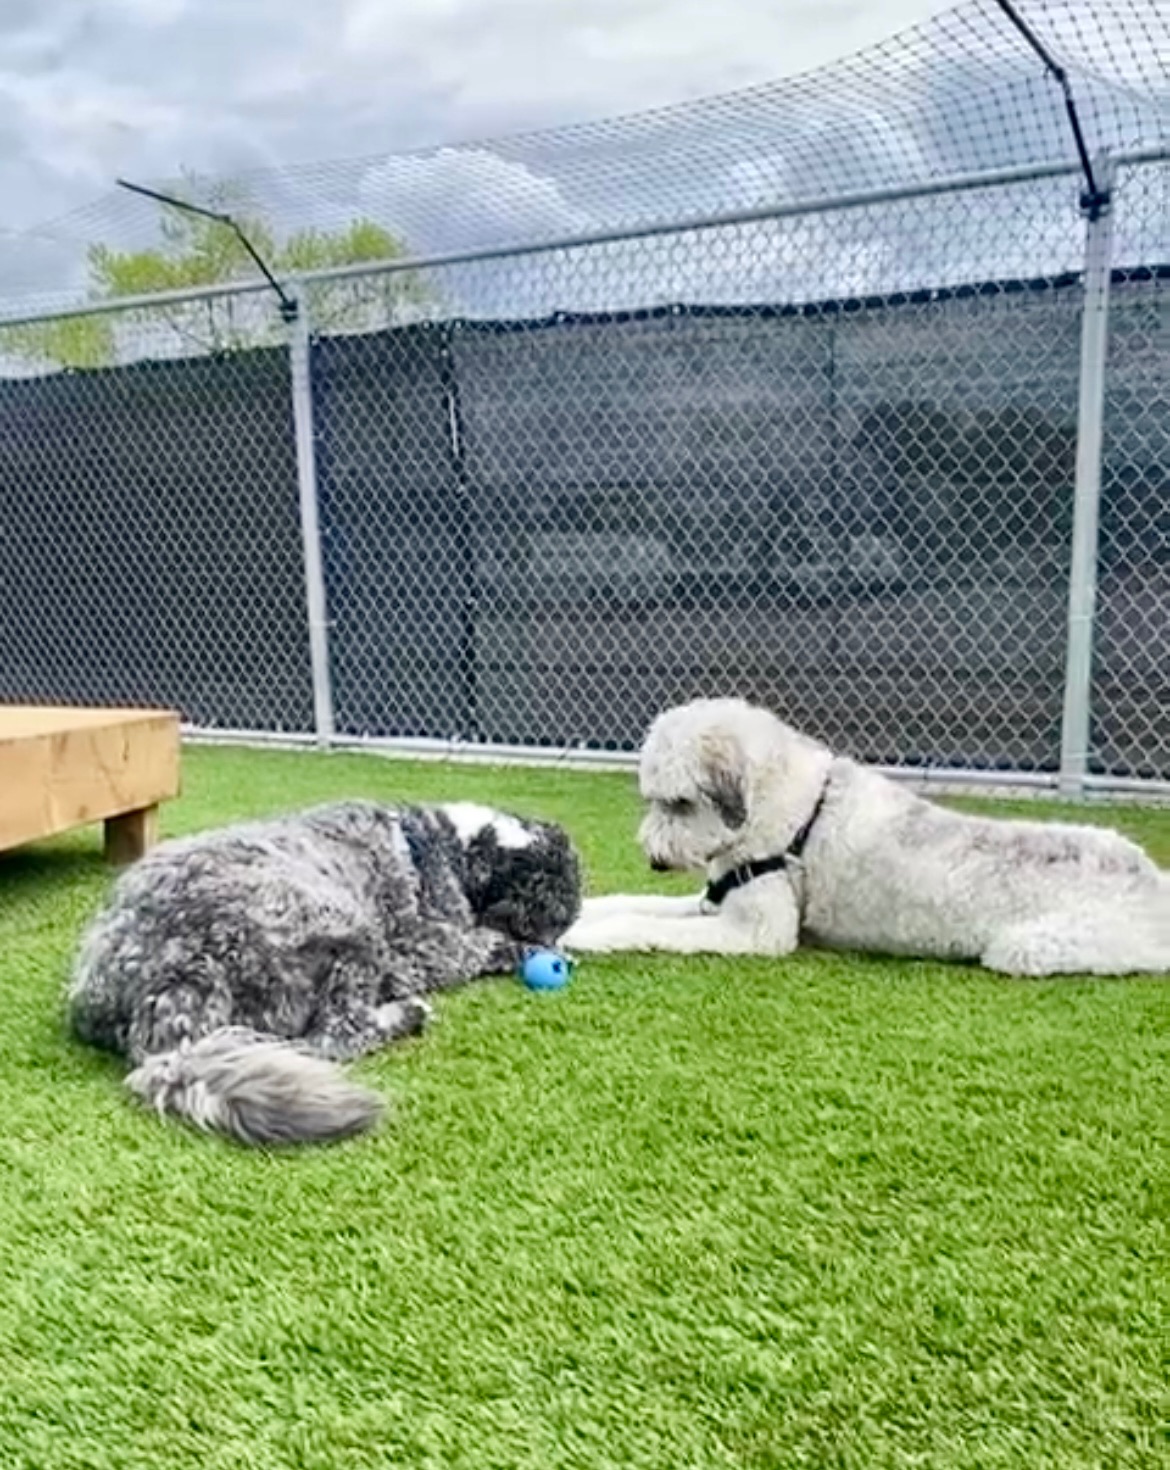 Two dogs are playing on the grass in an outdoor fenced area.